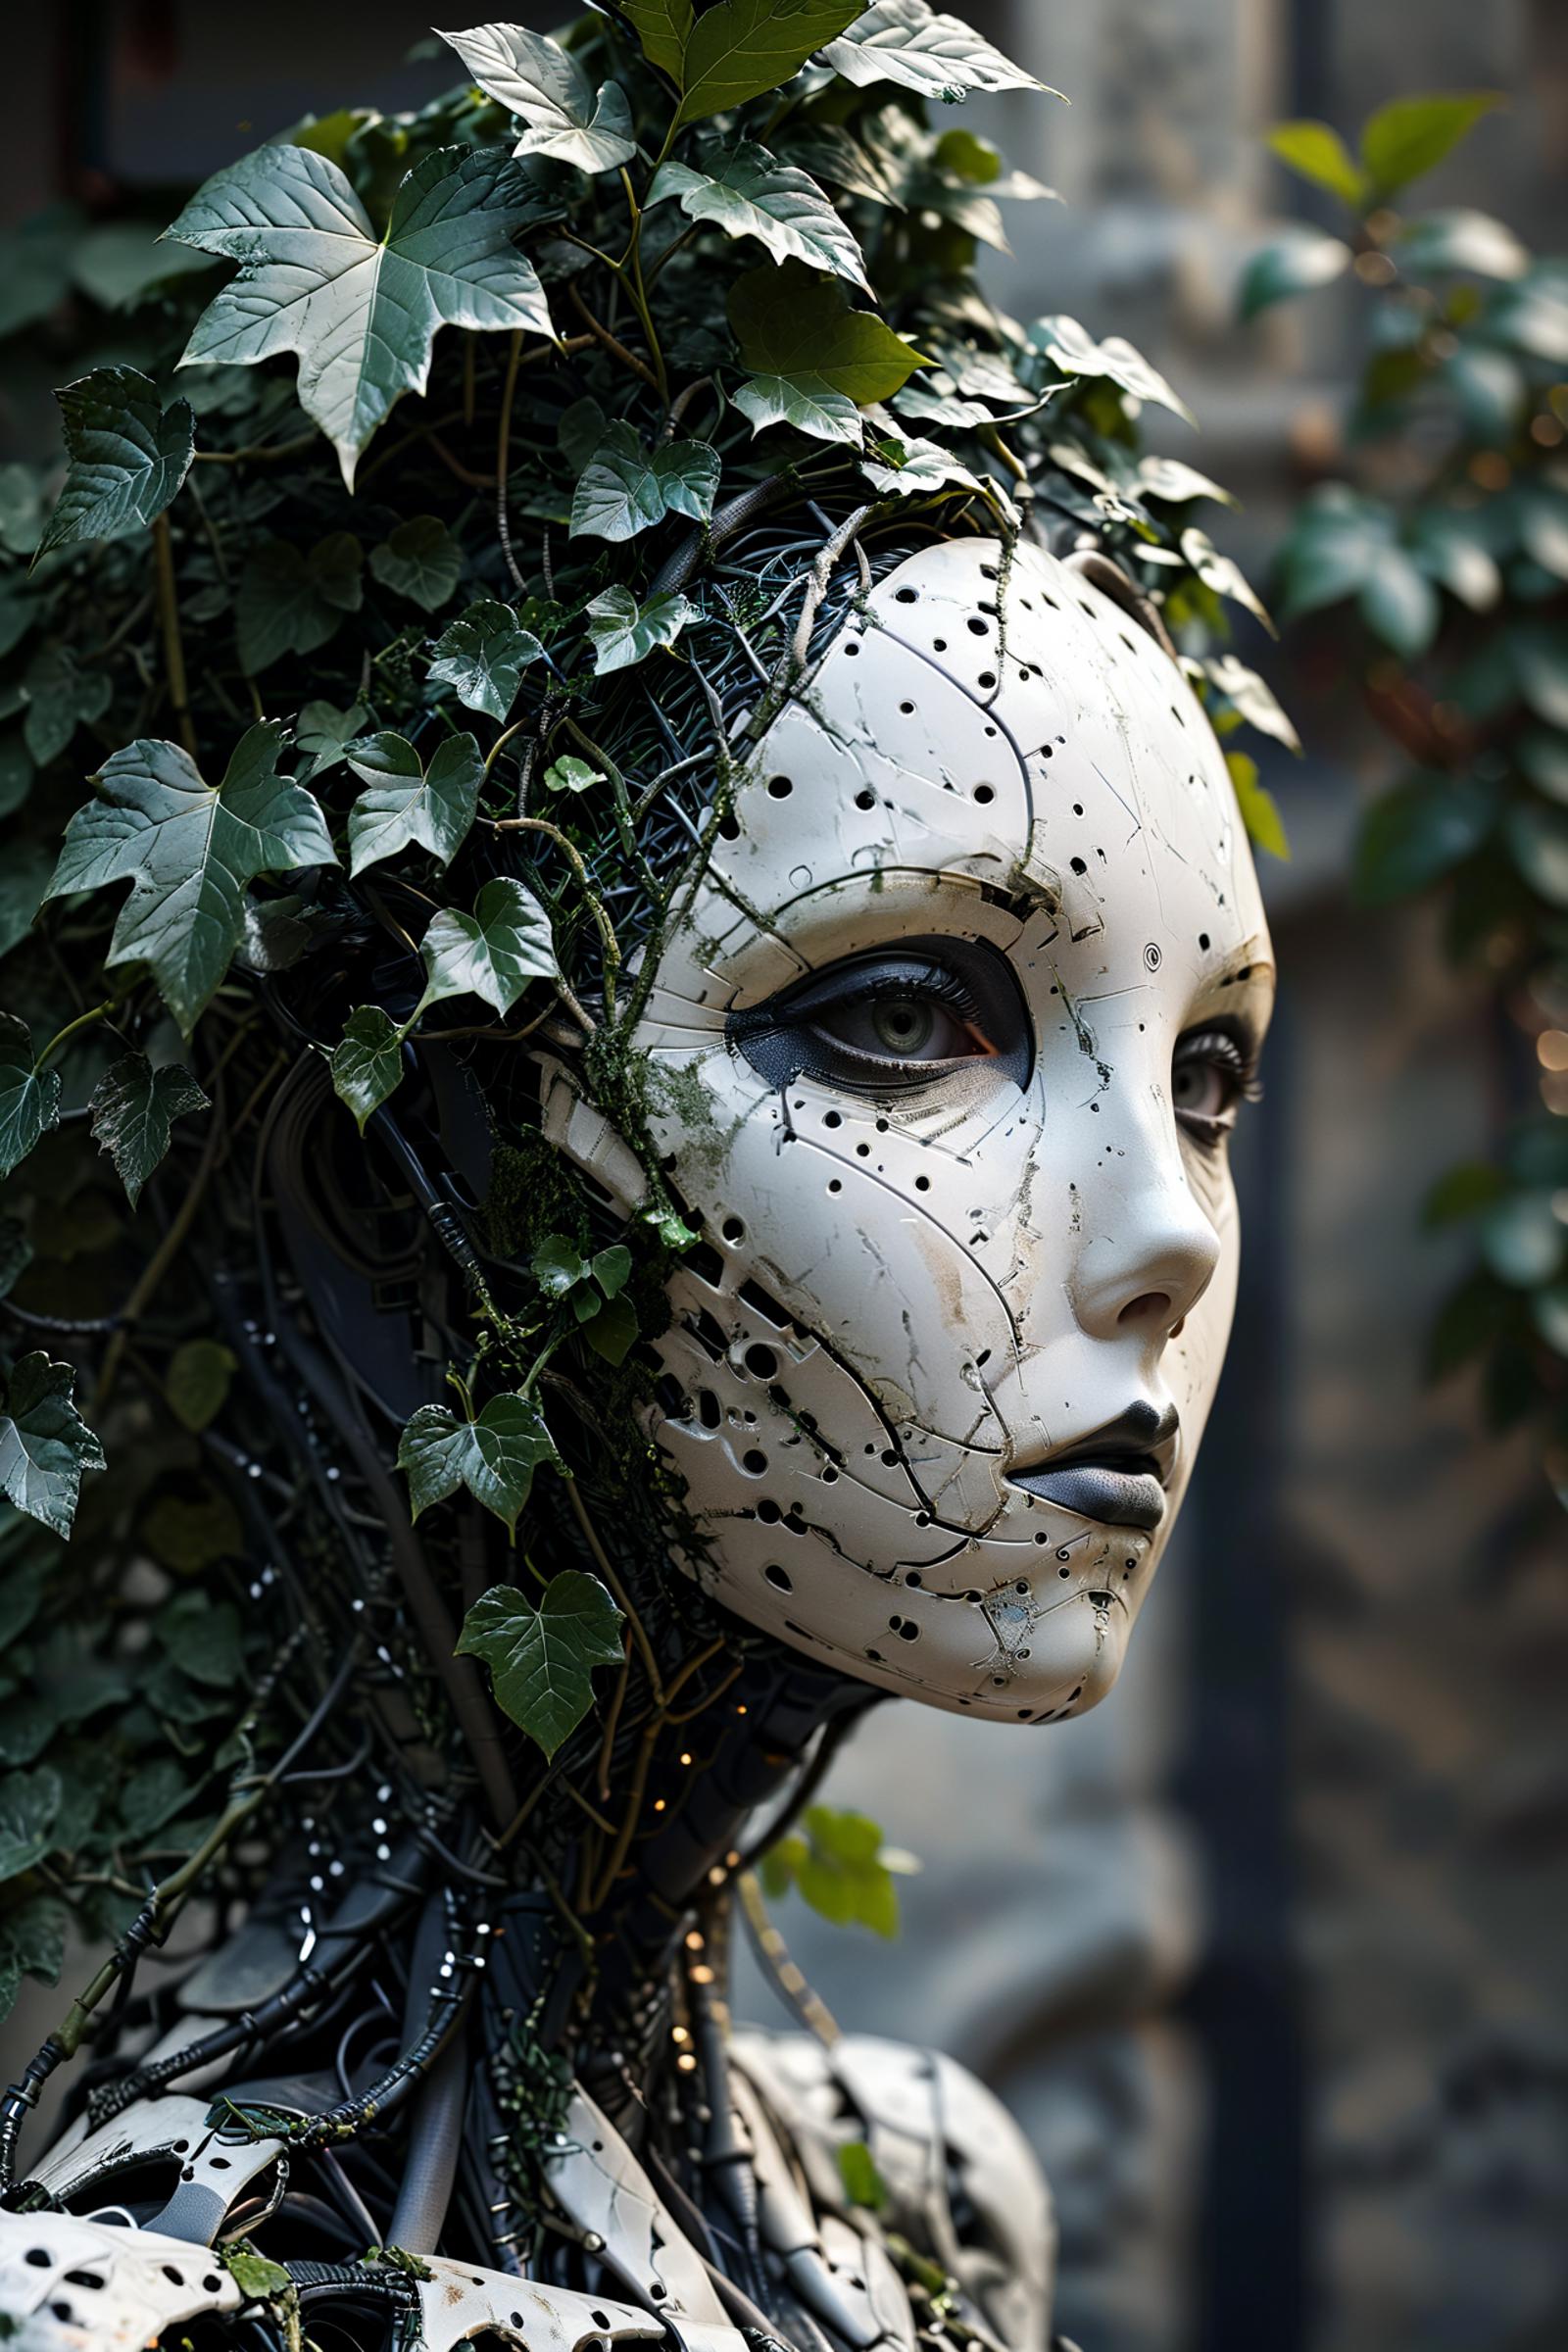 A sculpture of a human face with a plant growing out of it.